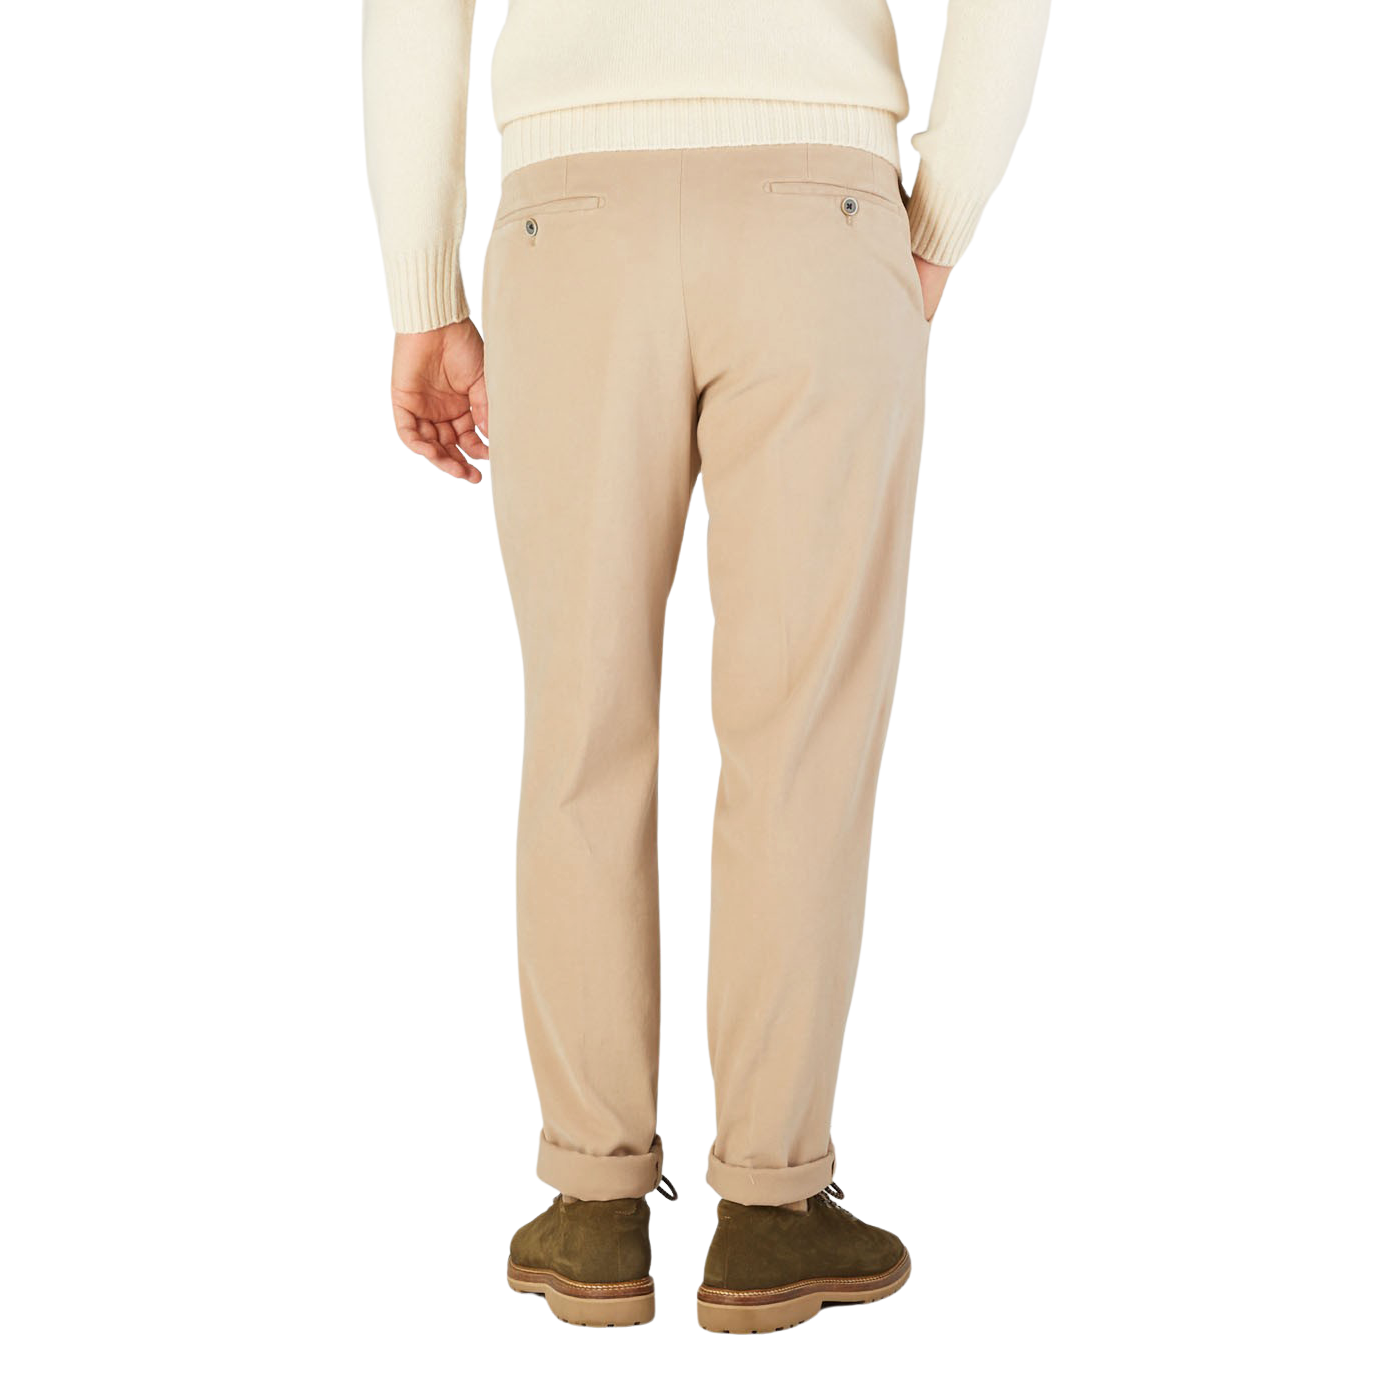 The back view of a man wearing Hiltl's Light Beige Cotton Stretch Regular Fit Chinos and a beige sweater.